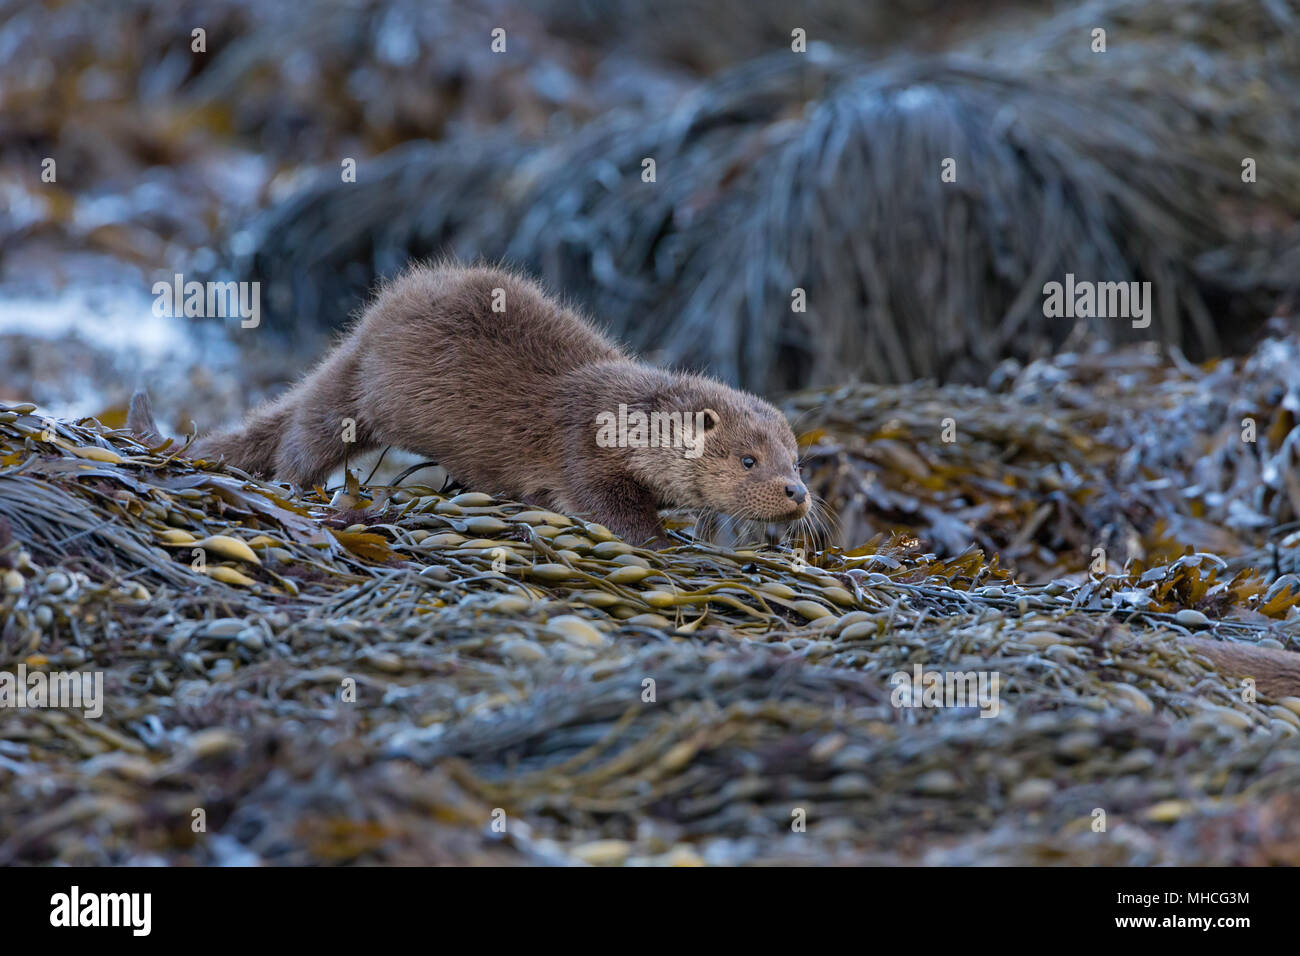 A very young otter cub follows his mother across some seaweed-covered rocks beside a coastal loch on the Isle Of Mull in Scotland. Stock Photo